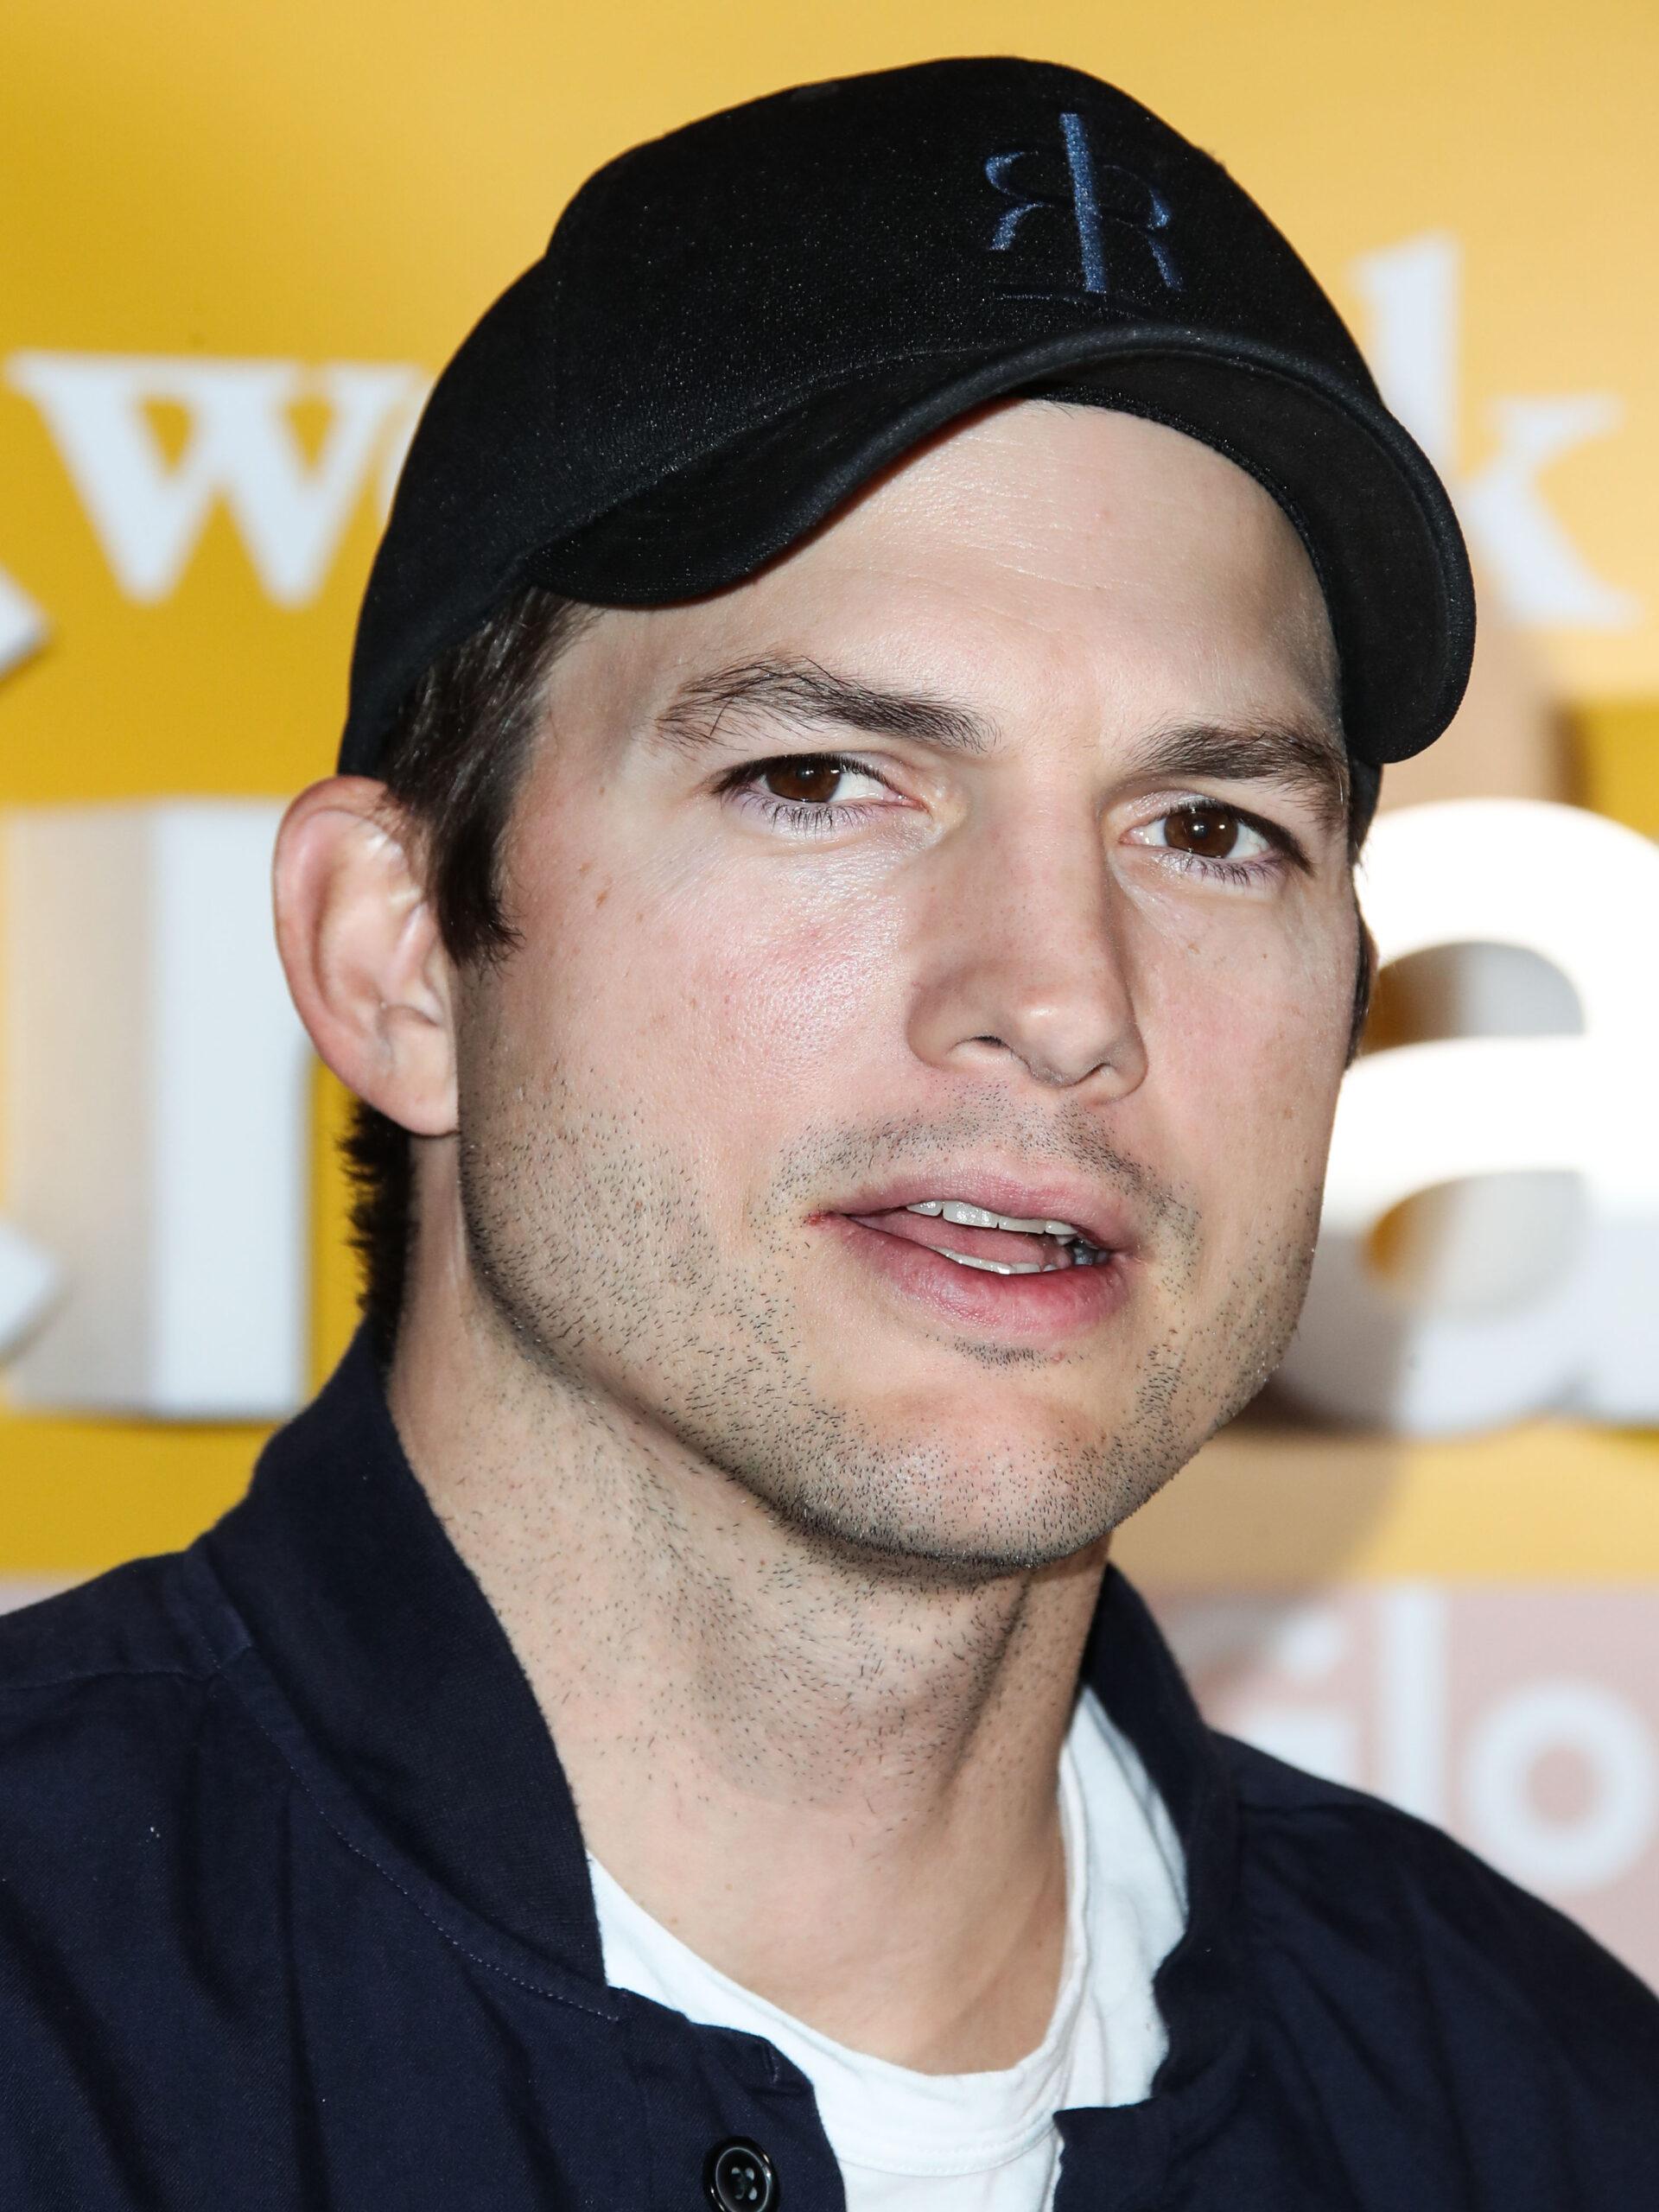 Actor Ashton Kutcher arrives at the WeWork Creator Awards Global Finals 2019 held at Microsoft Theatre L.A. Live on January 9, 2019 in Los Angeles, California, United States. 09 Jan 2019 Pictured: Ashton Kutcher.